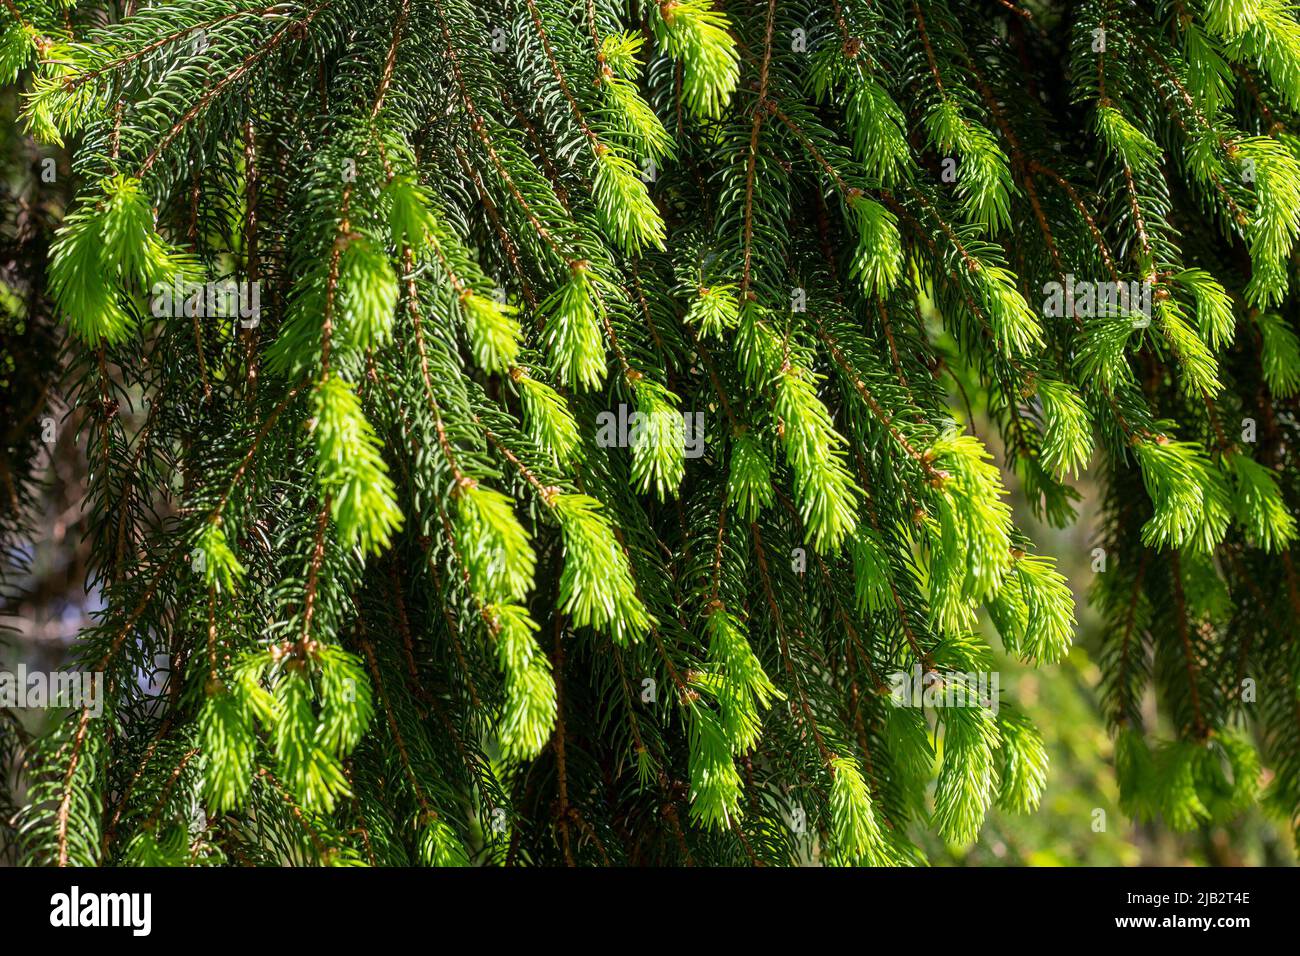 Bright green fresh fir tree new twigs and spruces in spring in the forest close up. Stock Photo